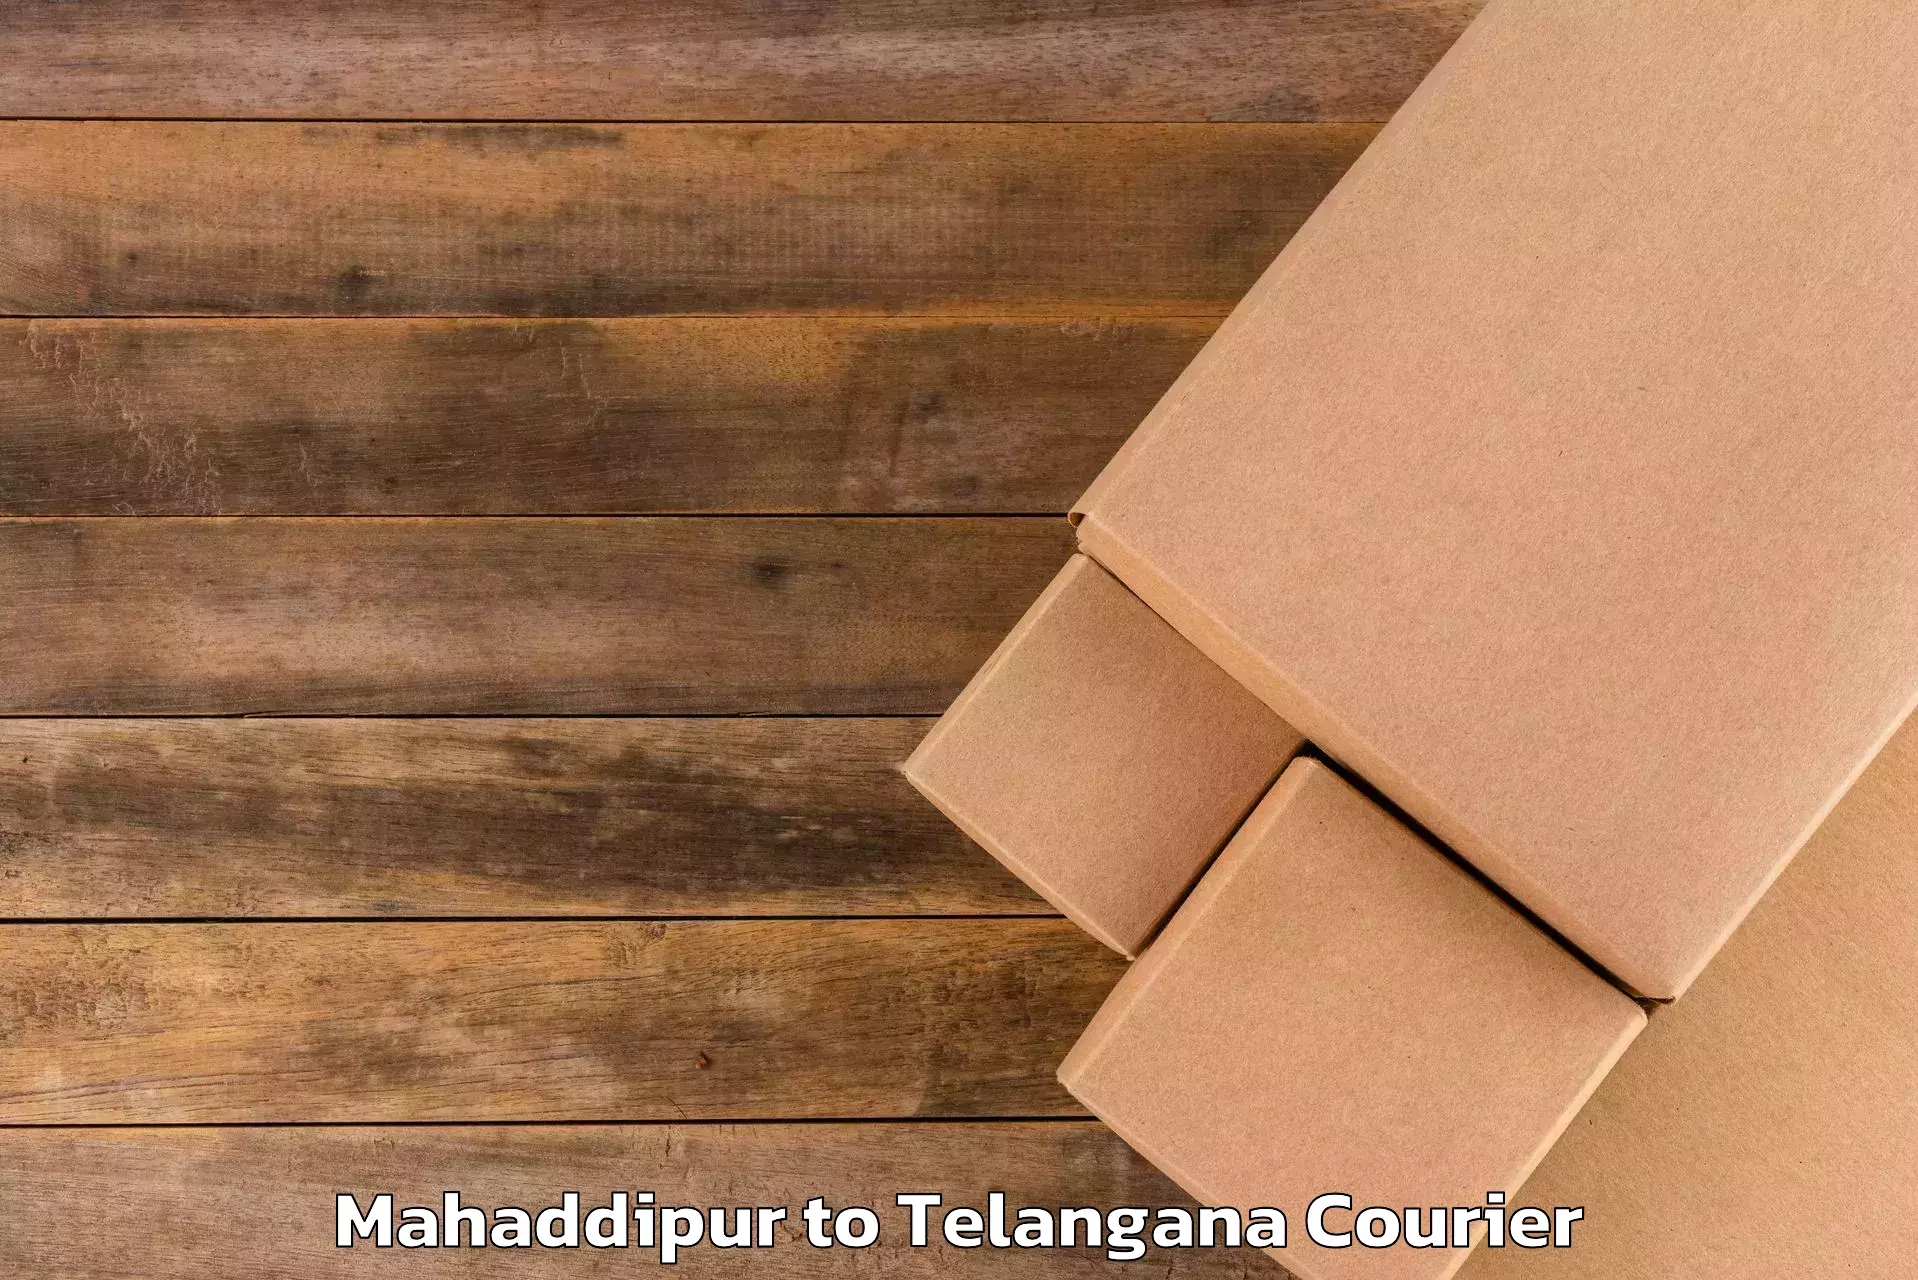 Overnight baggage shipping in Mahaddipur to Trimulgherry